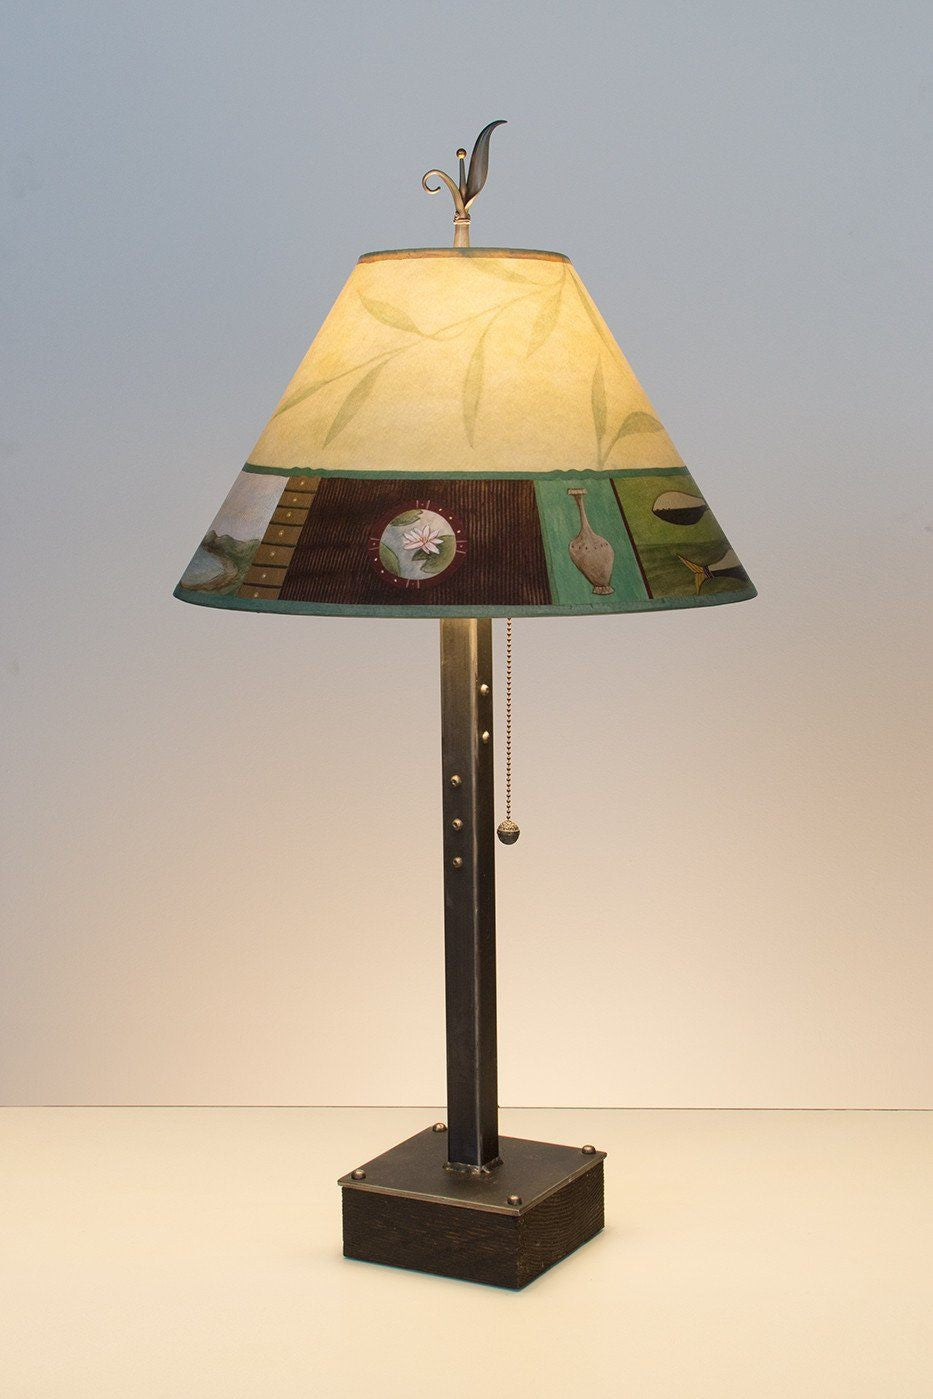 Steel Table Lamp on Wood with Medium Conical Shade in Twin Fish Lit